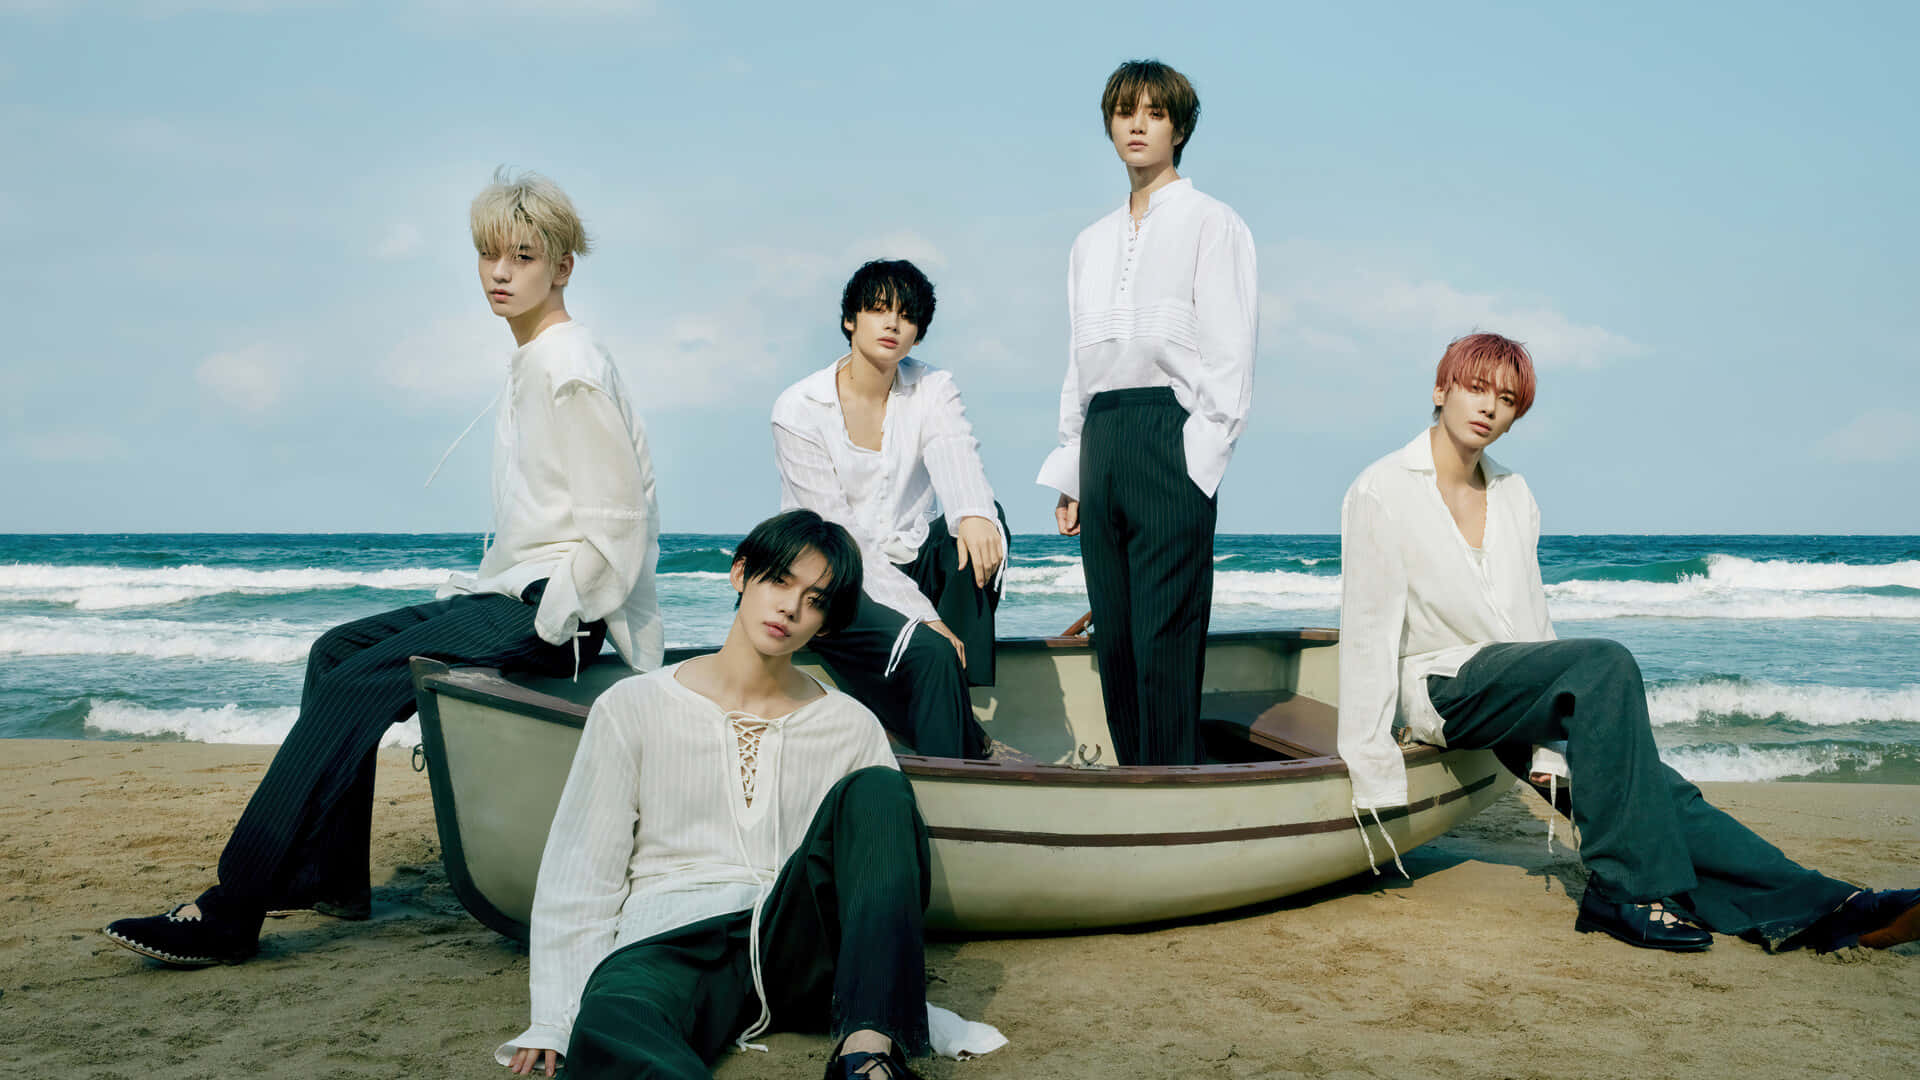 A Group Of Young Men Sitting On A Boat On The Beach Wallpaper